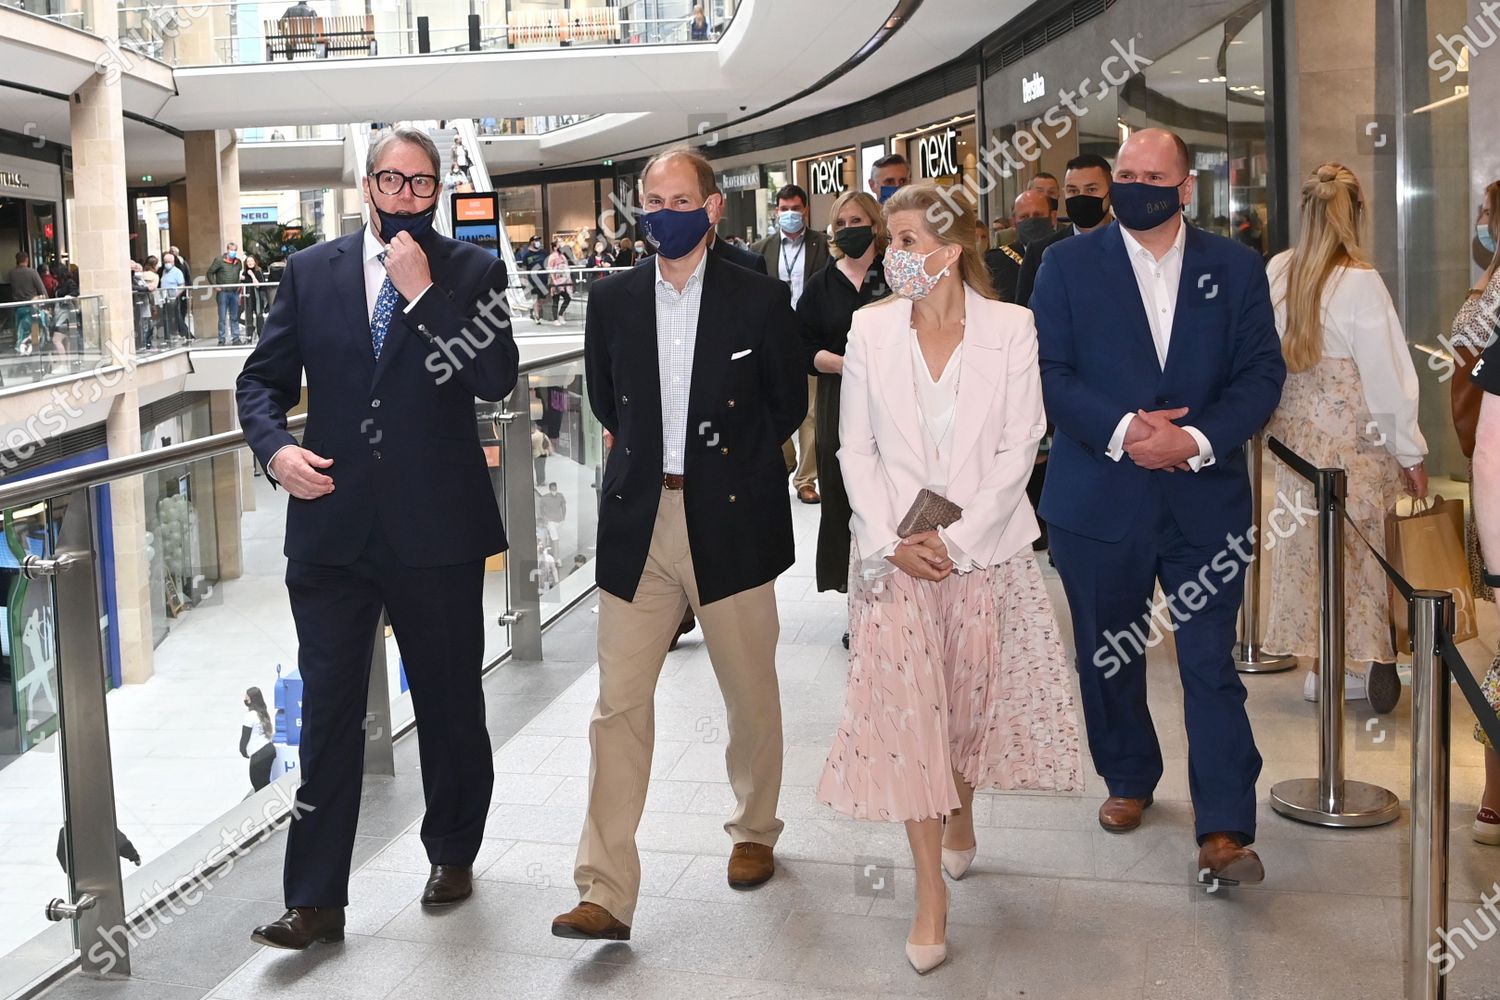 CASA REAL BRITÁNICA - Página 77 Prince-edward-and-sophie-countess-of-wessex-visit-to-edinburgh-scotland-uk-shutterstock-editorial-12173651x